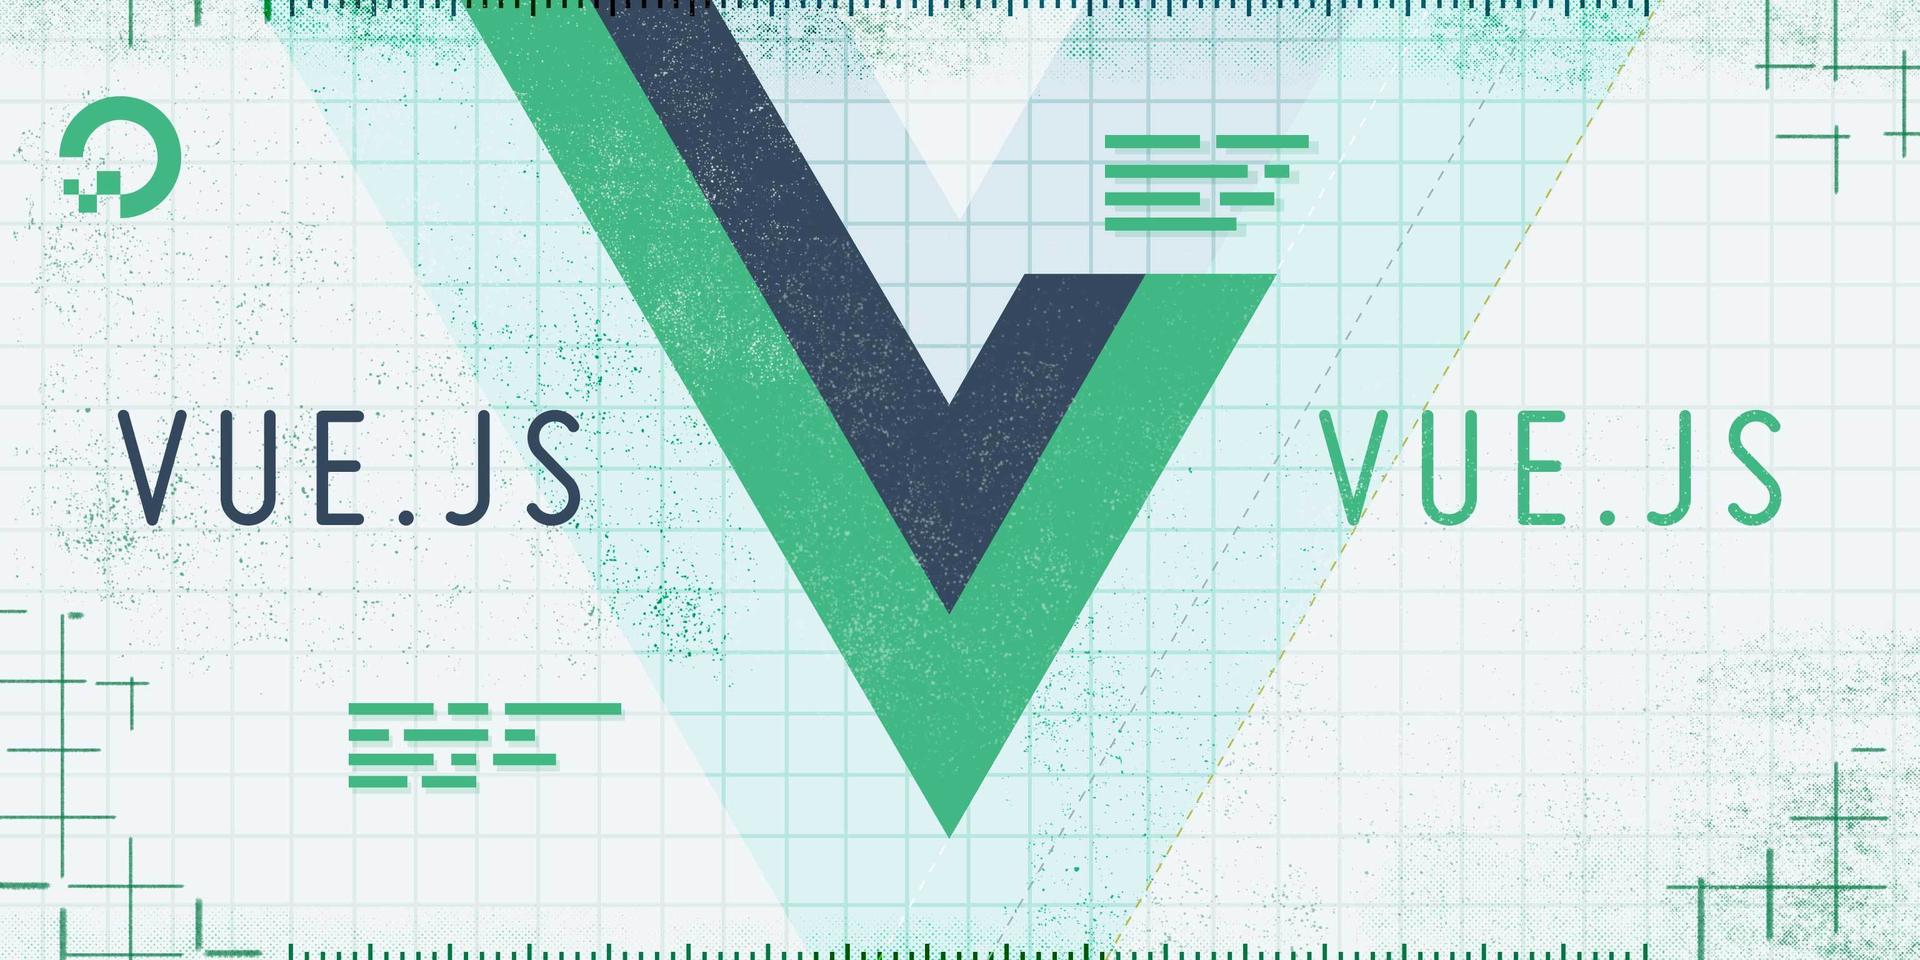 How To Make Your Vue.js Application DRY with Slots, Mixins, and Composition API